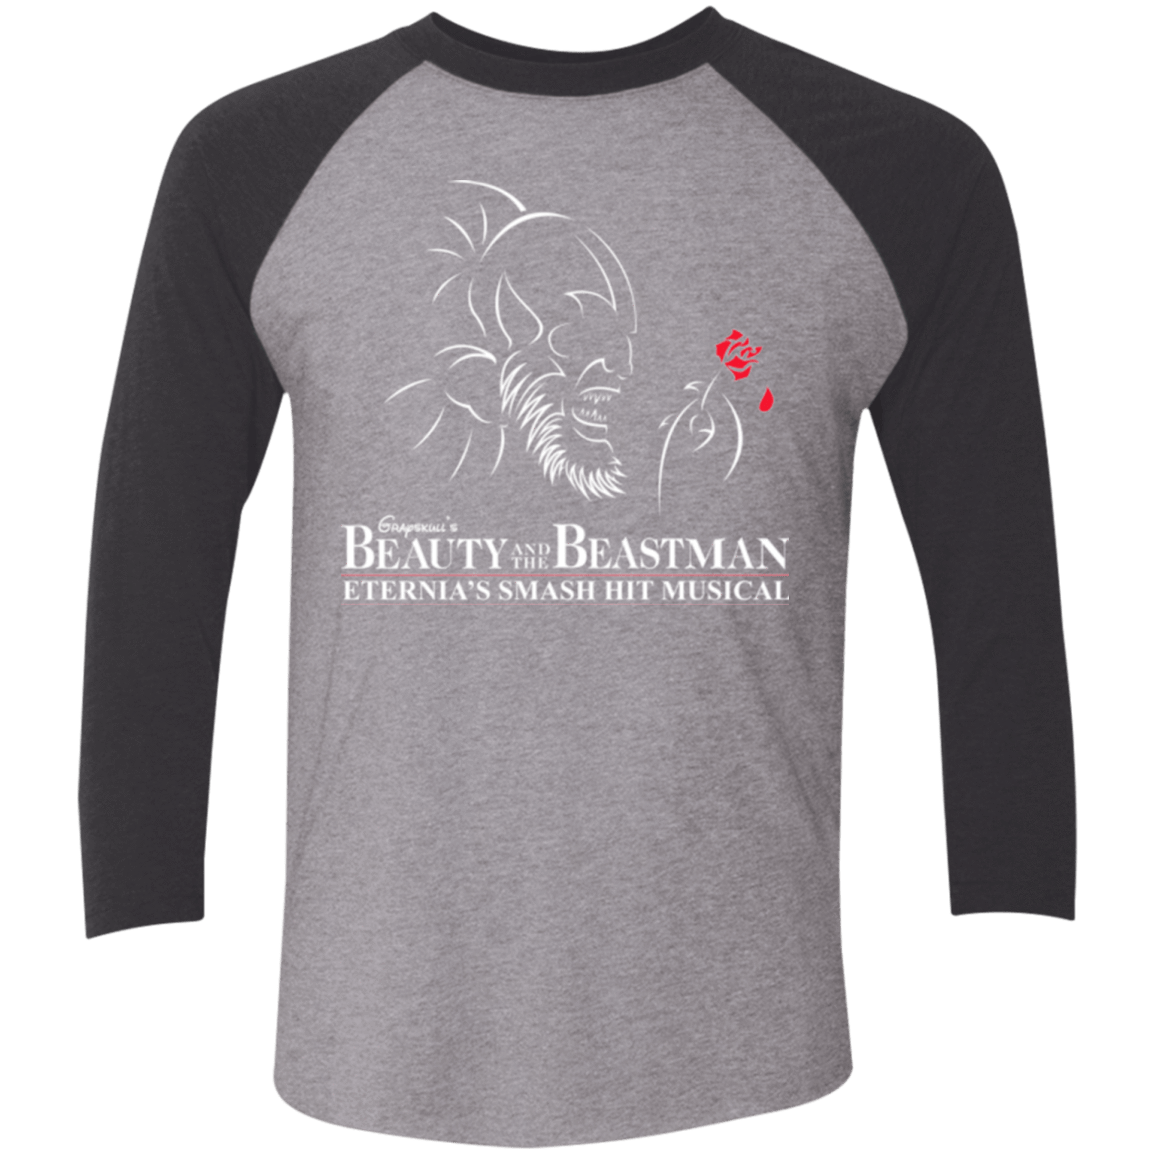 T-Shirts Premium Heather/ Vintage Black / X-Small Beauty and the Beastman Men's Triblend 3/4 Sleeve